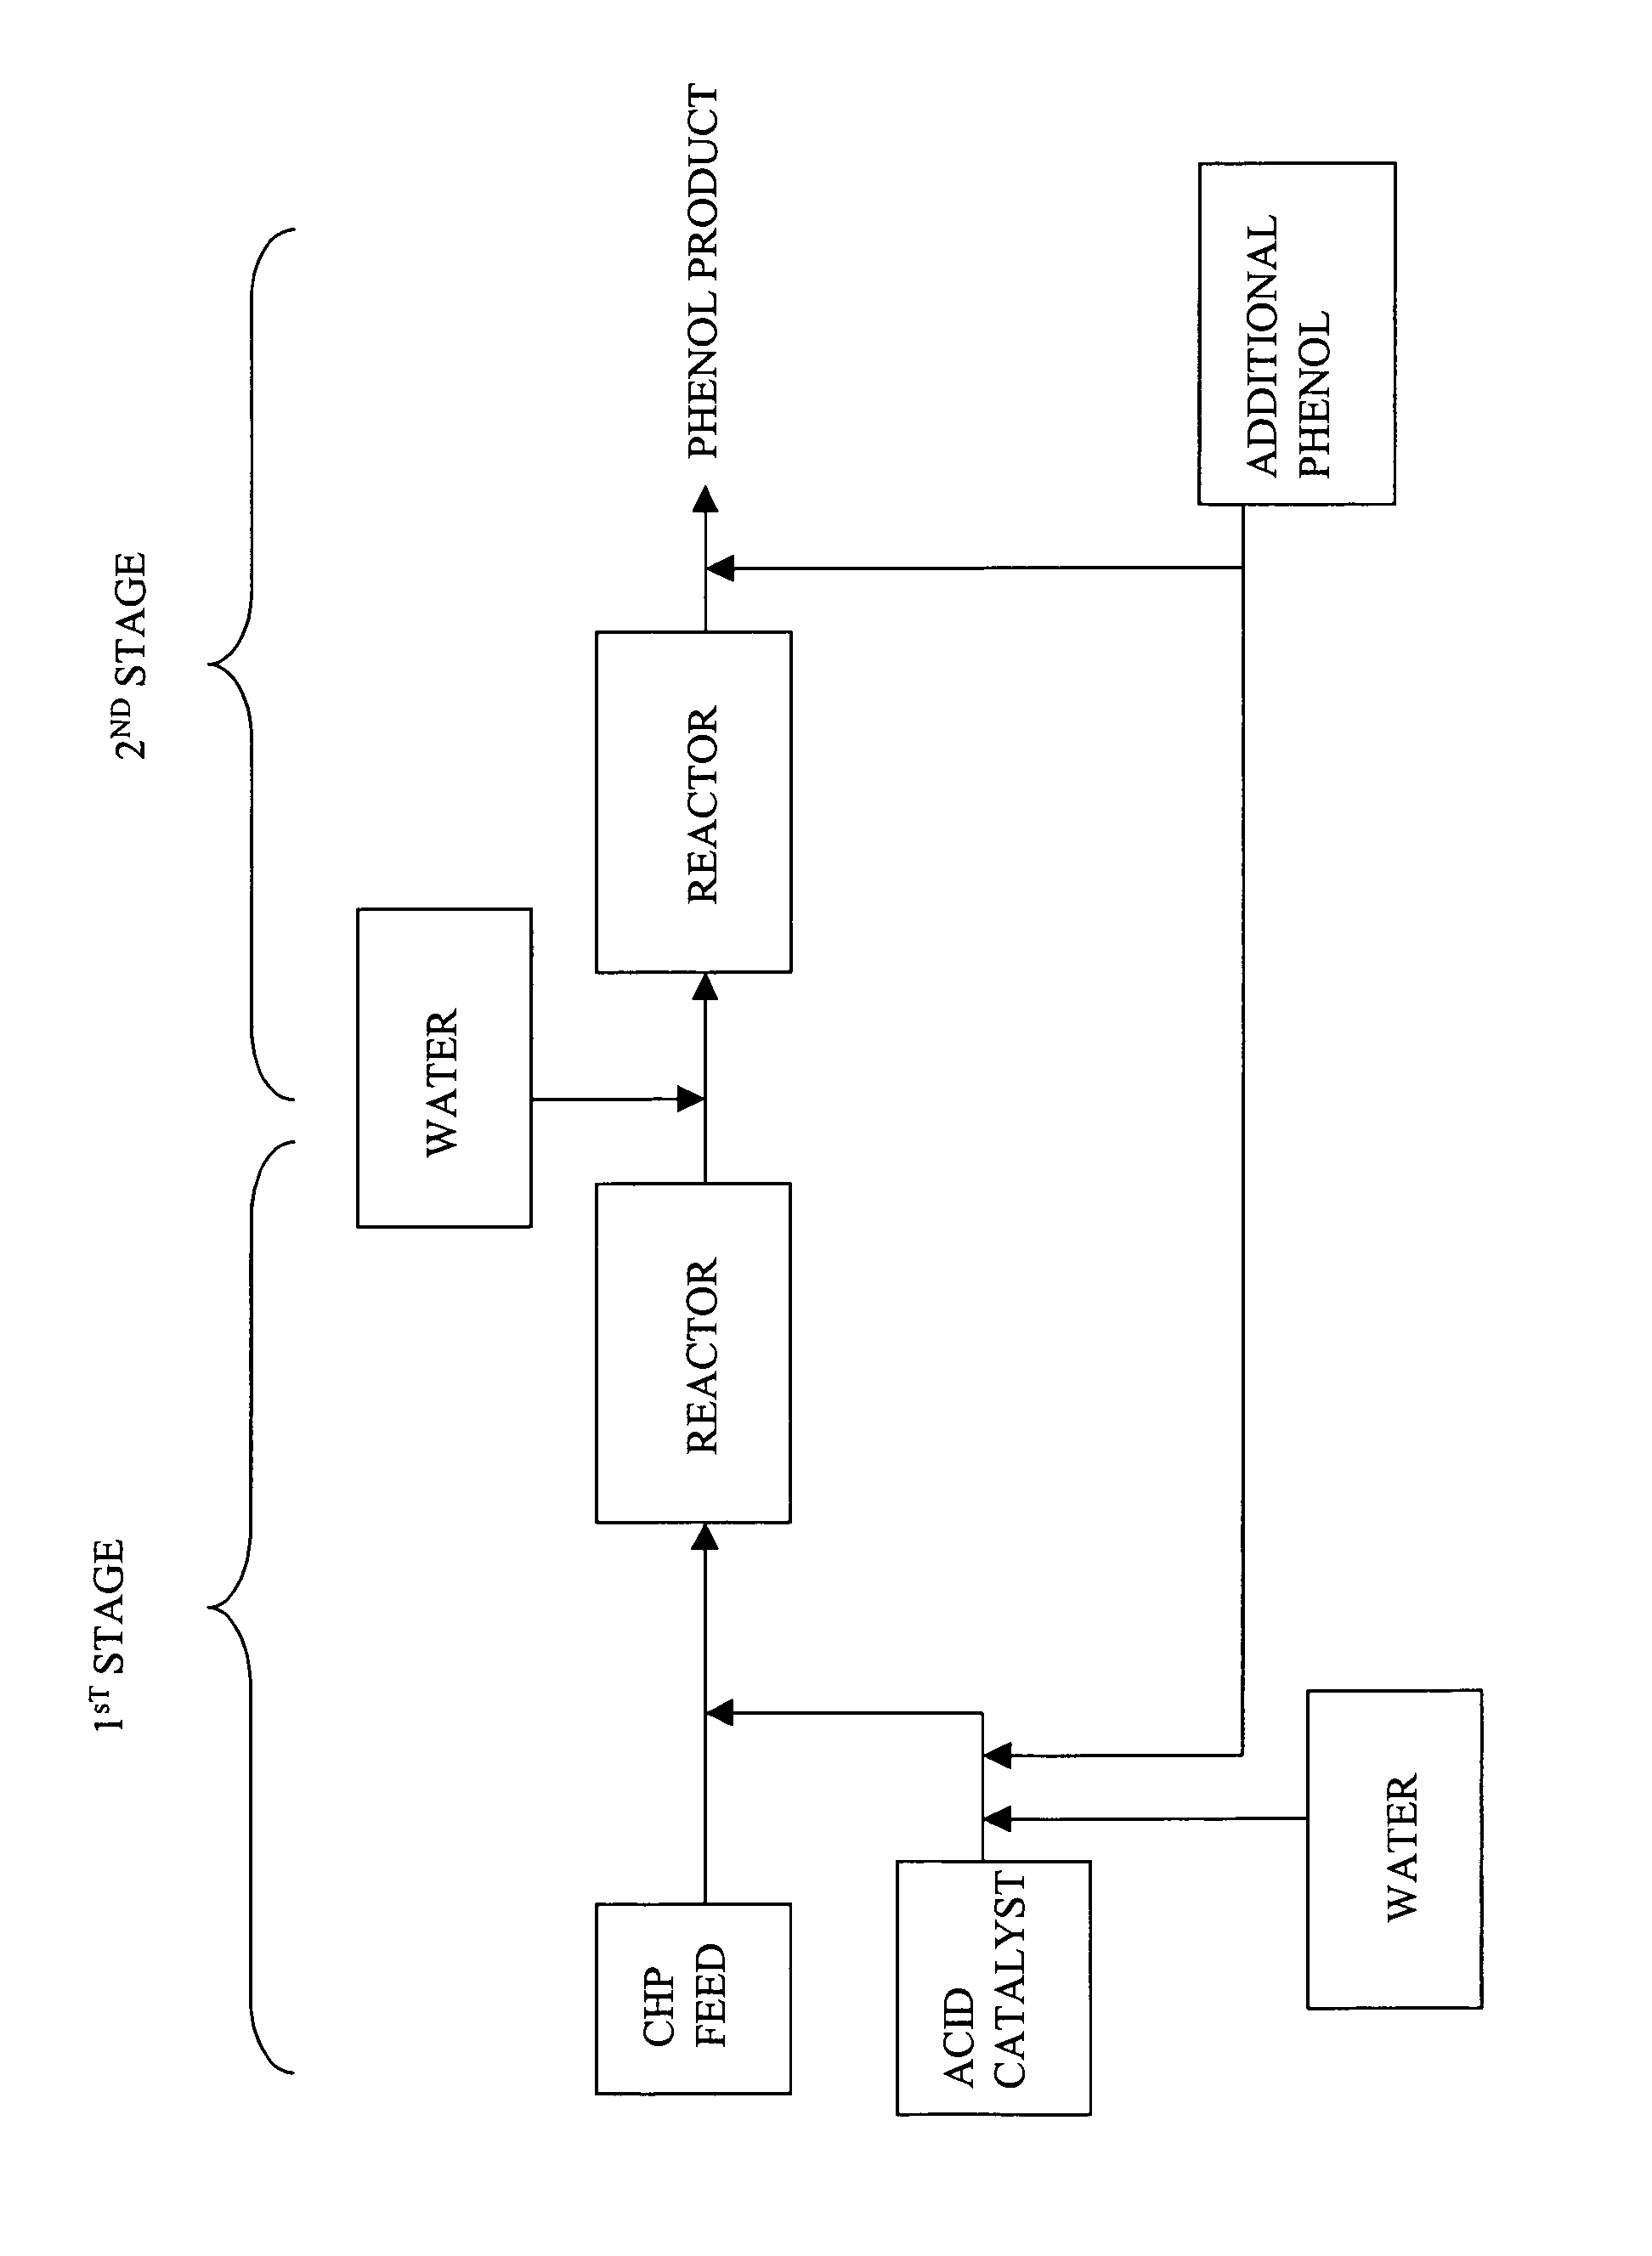 Process for producing phenol